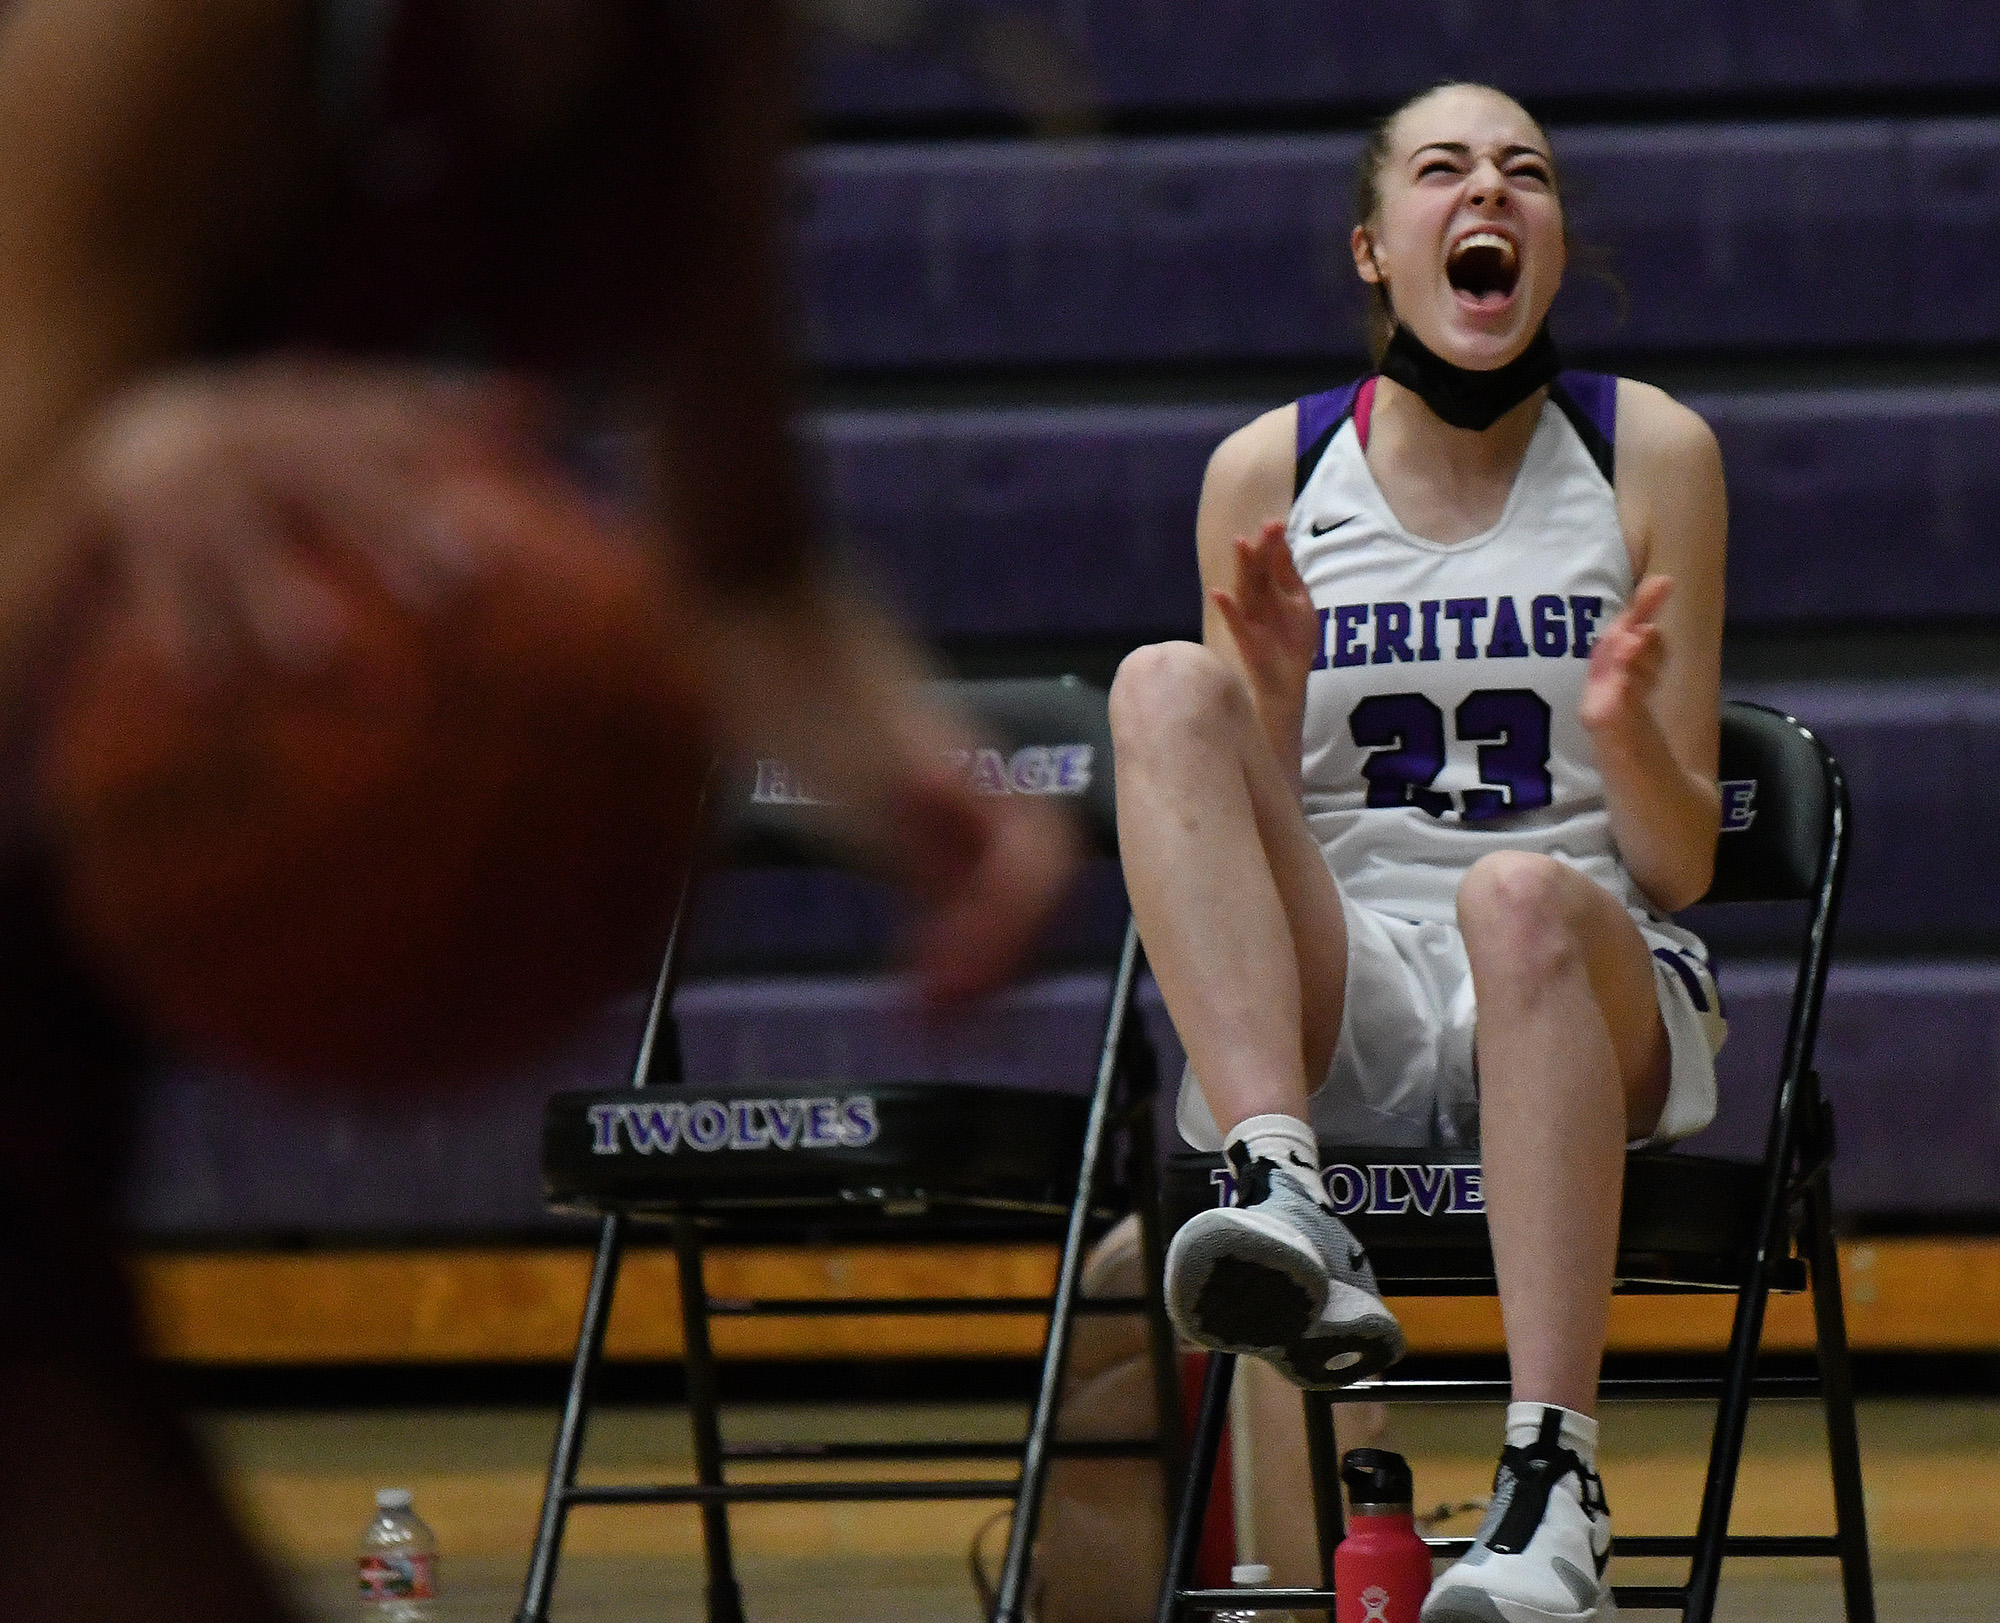 Heritage junior Paige Kirby celebrates after a three-point shot Thursday, May 20, 2021, during the Timberwolves' 53-42 win against the Falcons at Heritage High School in Vancouver.